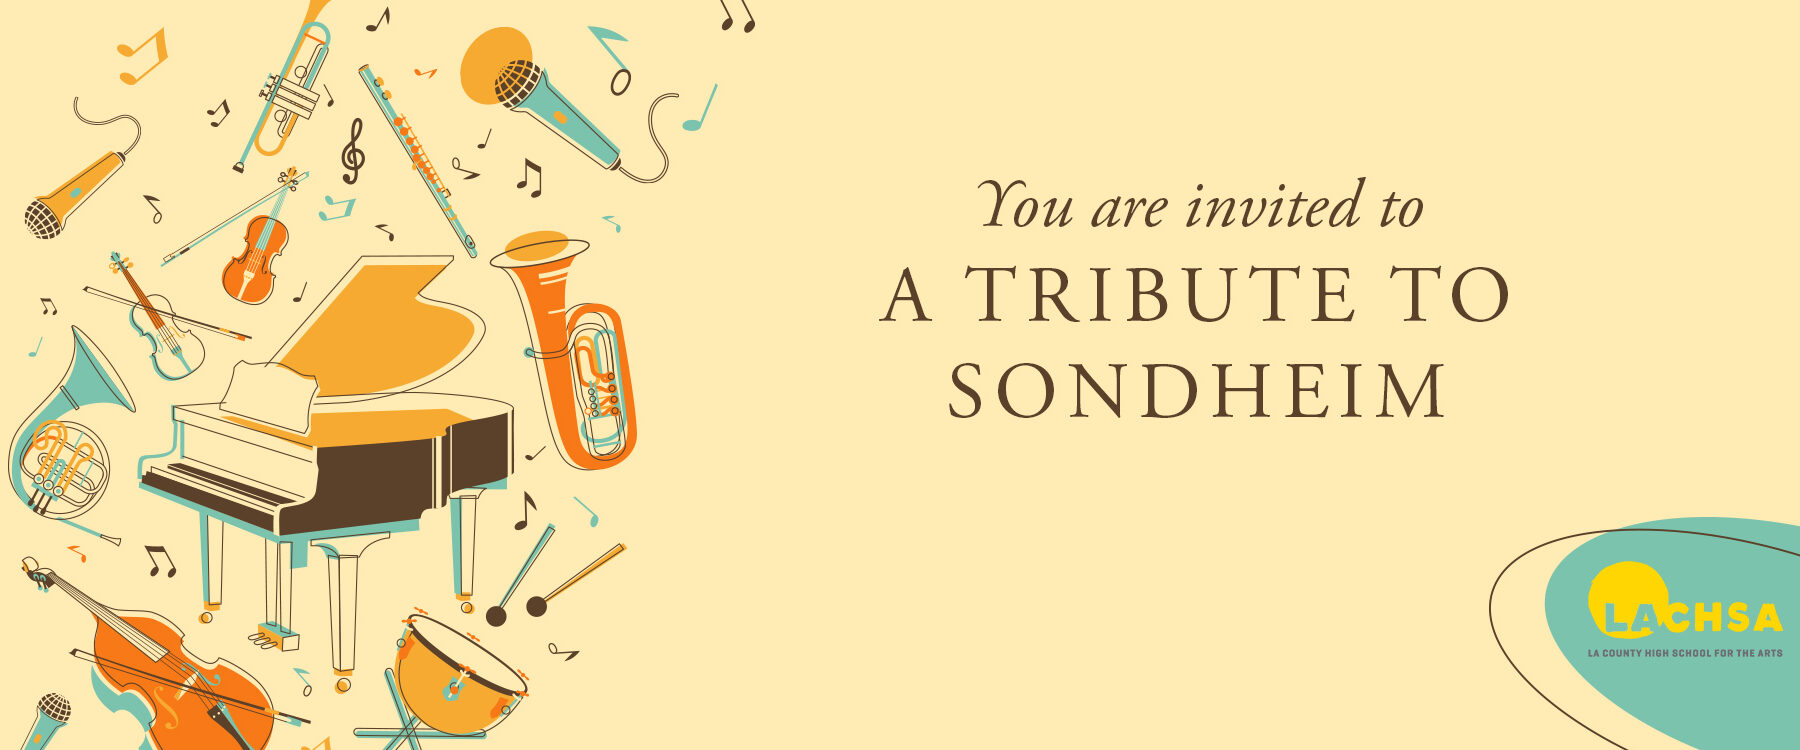 A Tribute to Sondheim presented by LACHSA